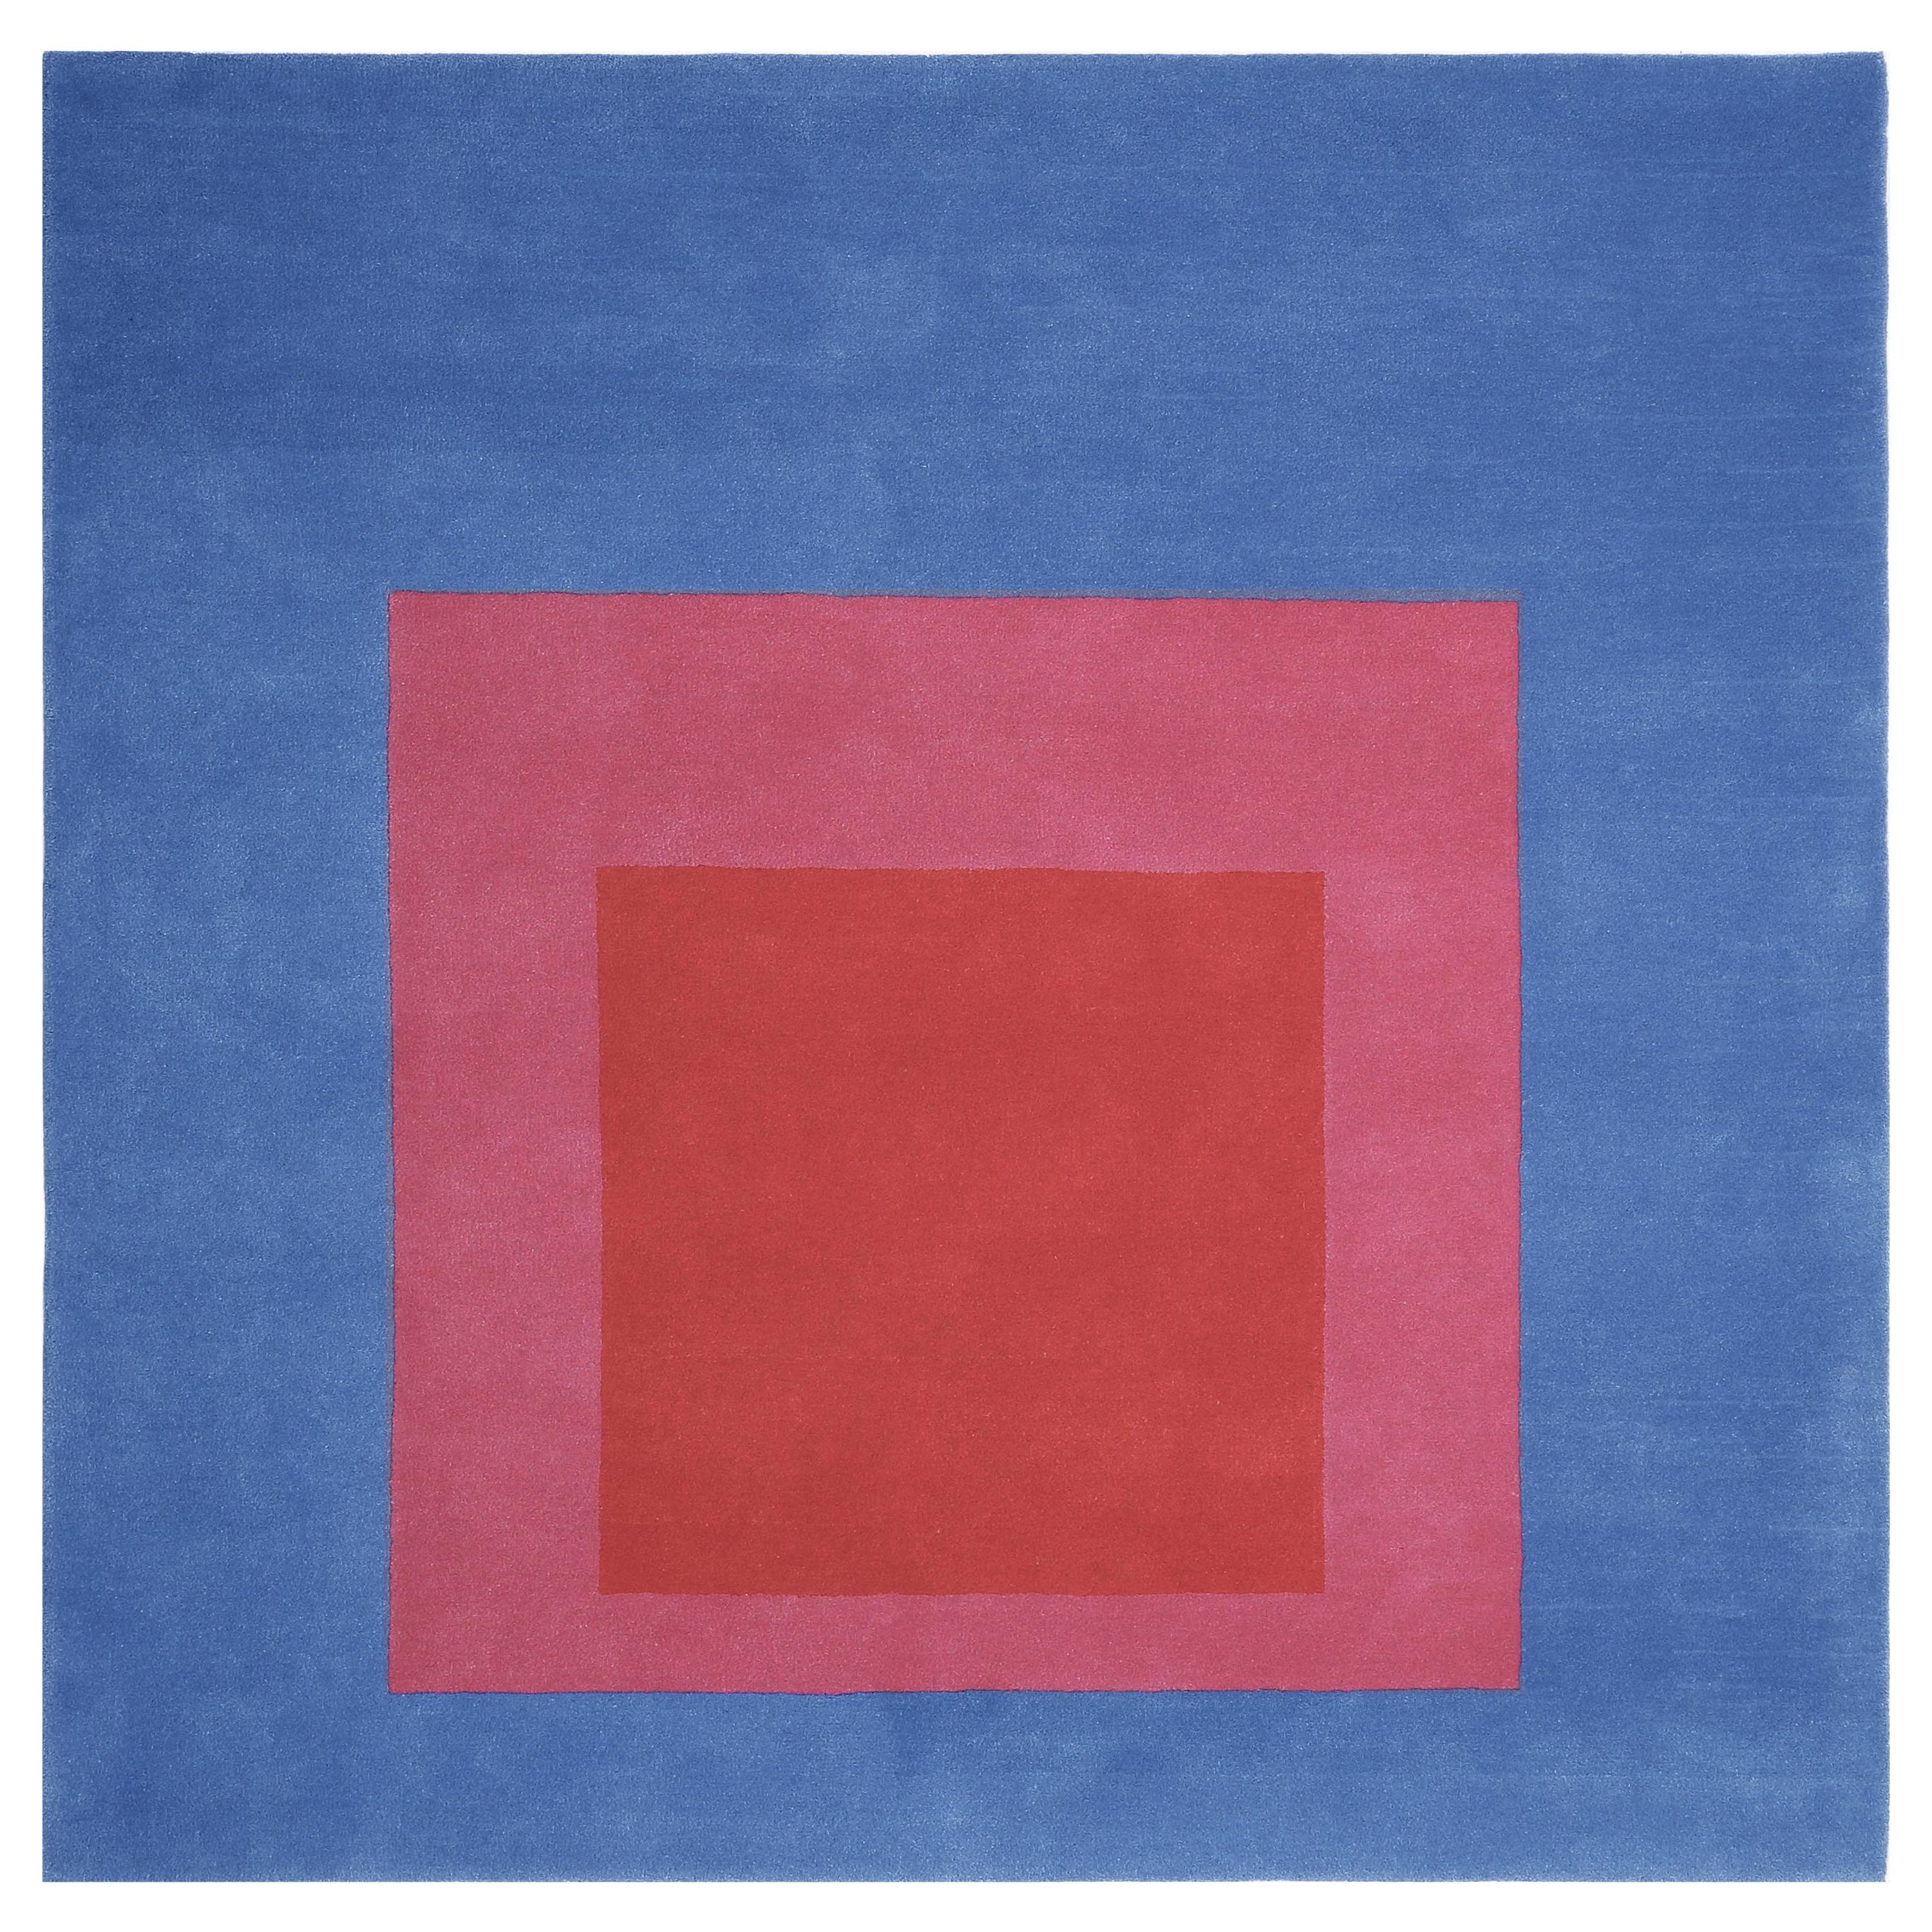 Homage to the Square Rug ‘Blue or Pink or Red’ by Josef Albers